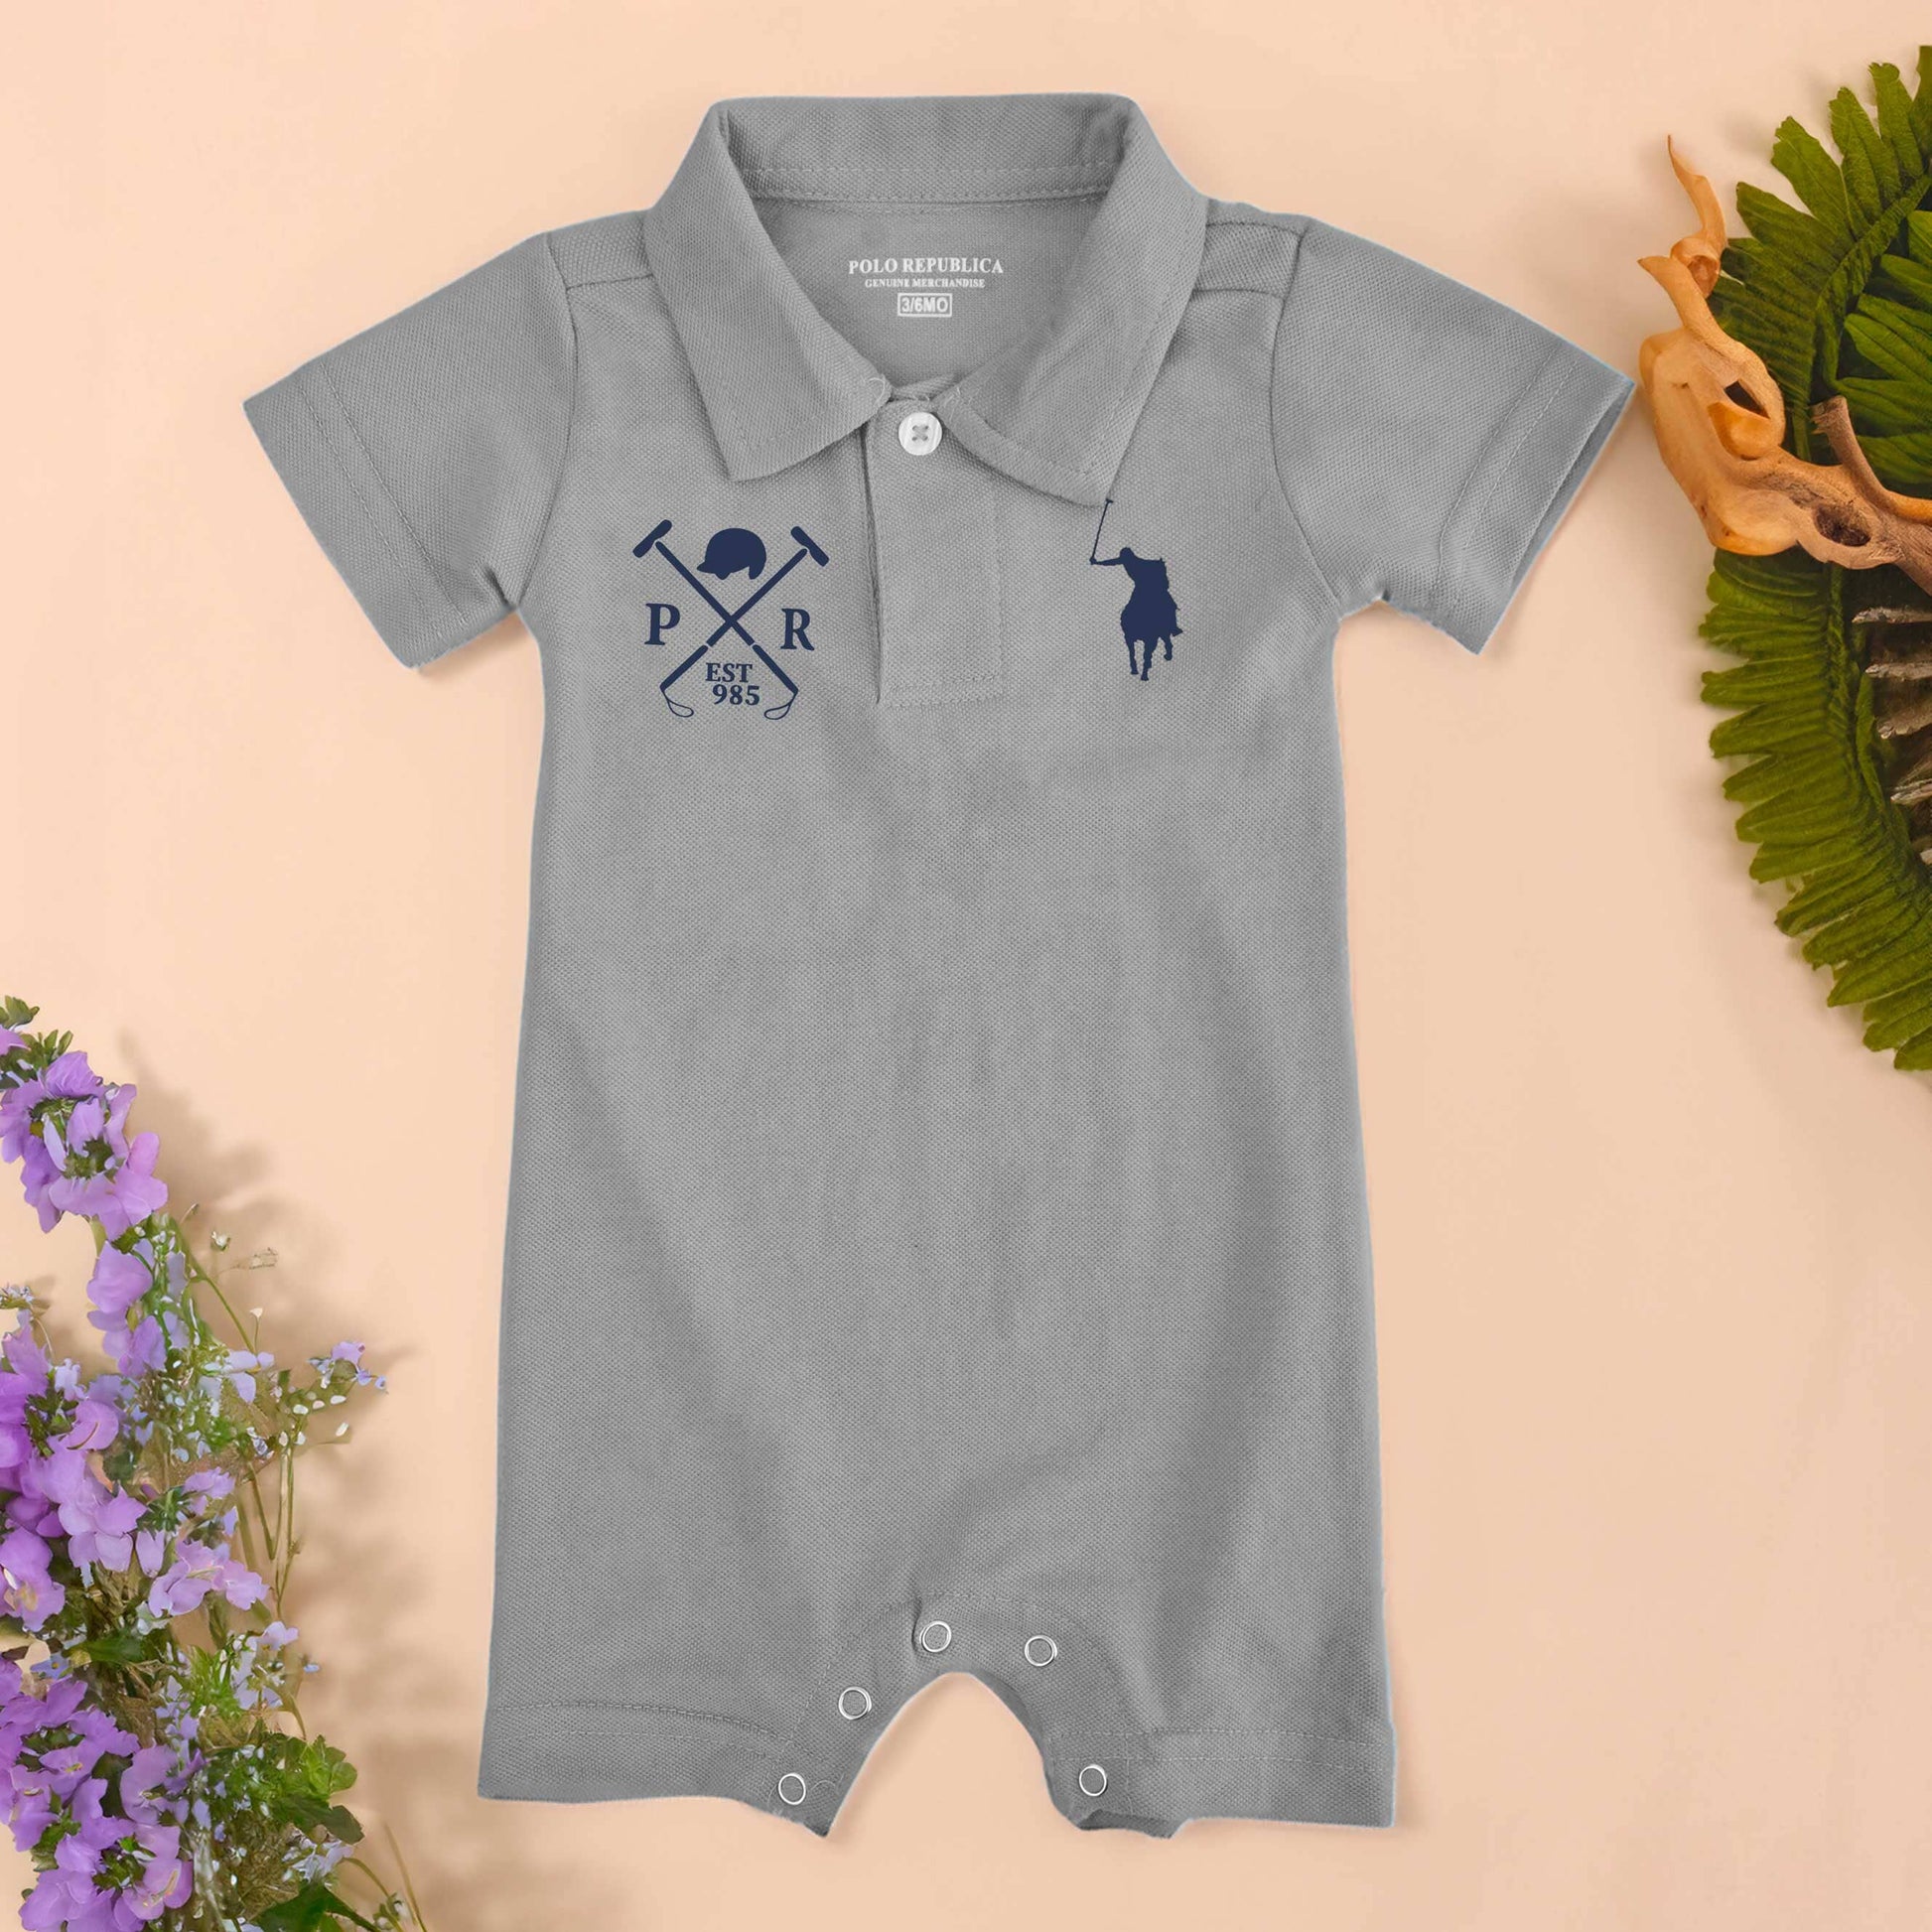 Polo Republica Signature Pony PR Mallets Printed Short Sleeve Baby Romper Romper Polo Republica Grey & Navy 0-3 Months 